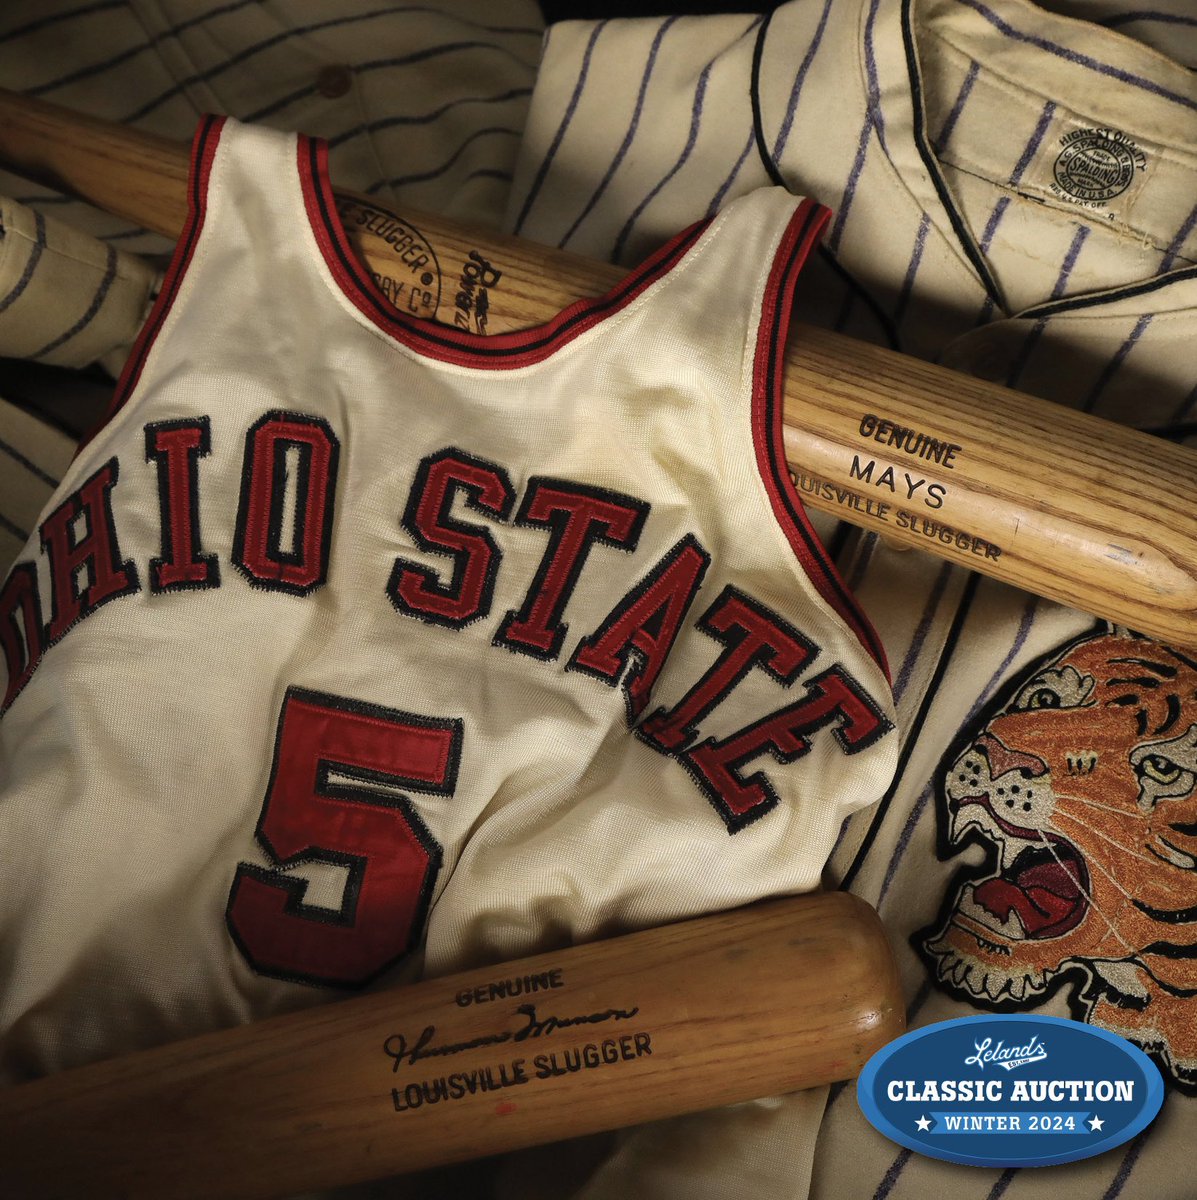 Explore history in the Lelands Winter Classic Auction. Featuring lots such as a 1927 Carroll Detroit Tigers Game Worn Uniform, a 1960-62 Havlicek Ohio State Game Worn Jersey, a 1969-72 Mays Game Used Bat, and a 1970-72 Munson Rookie Era Game Used Bat.  auction.lelands.com/Lots/Gallery